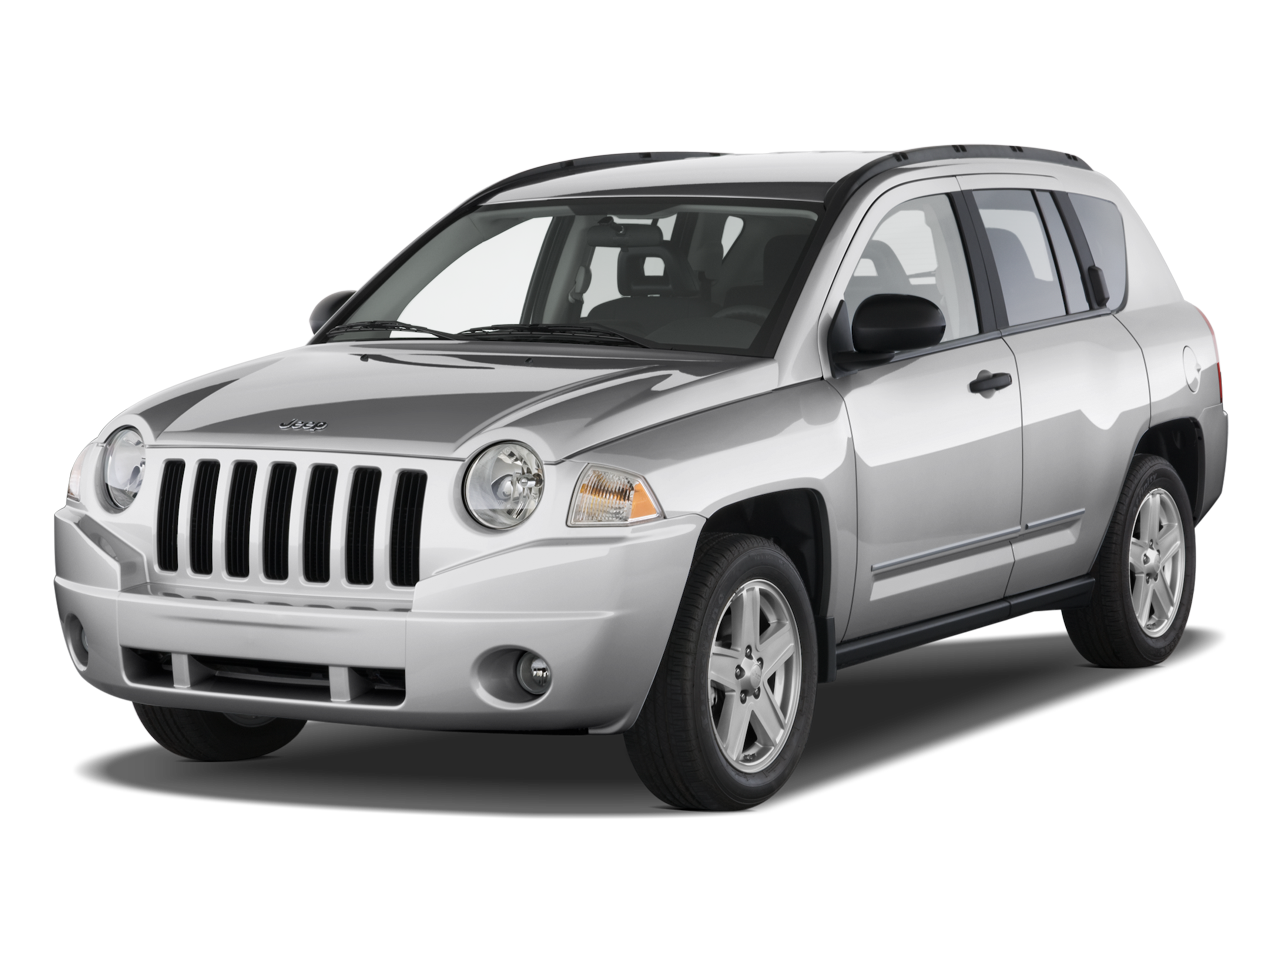 2010 Jeep Compass Prices, Reviews, and Photos - MotorTrend